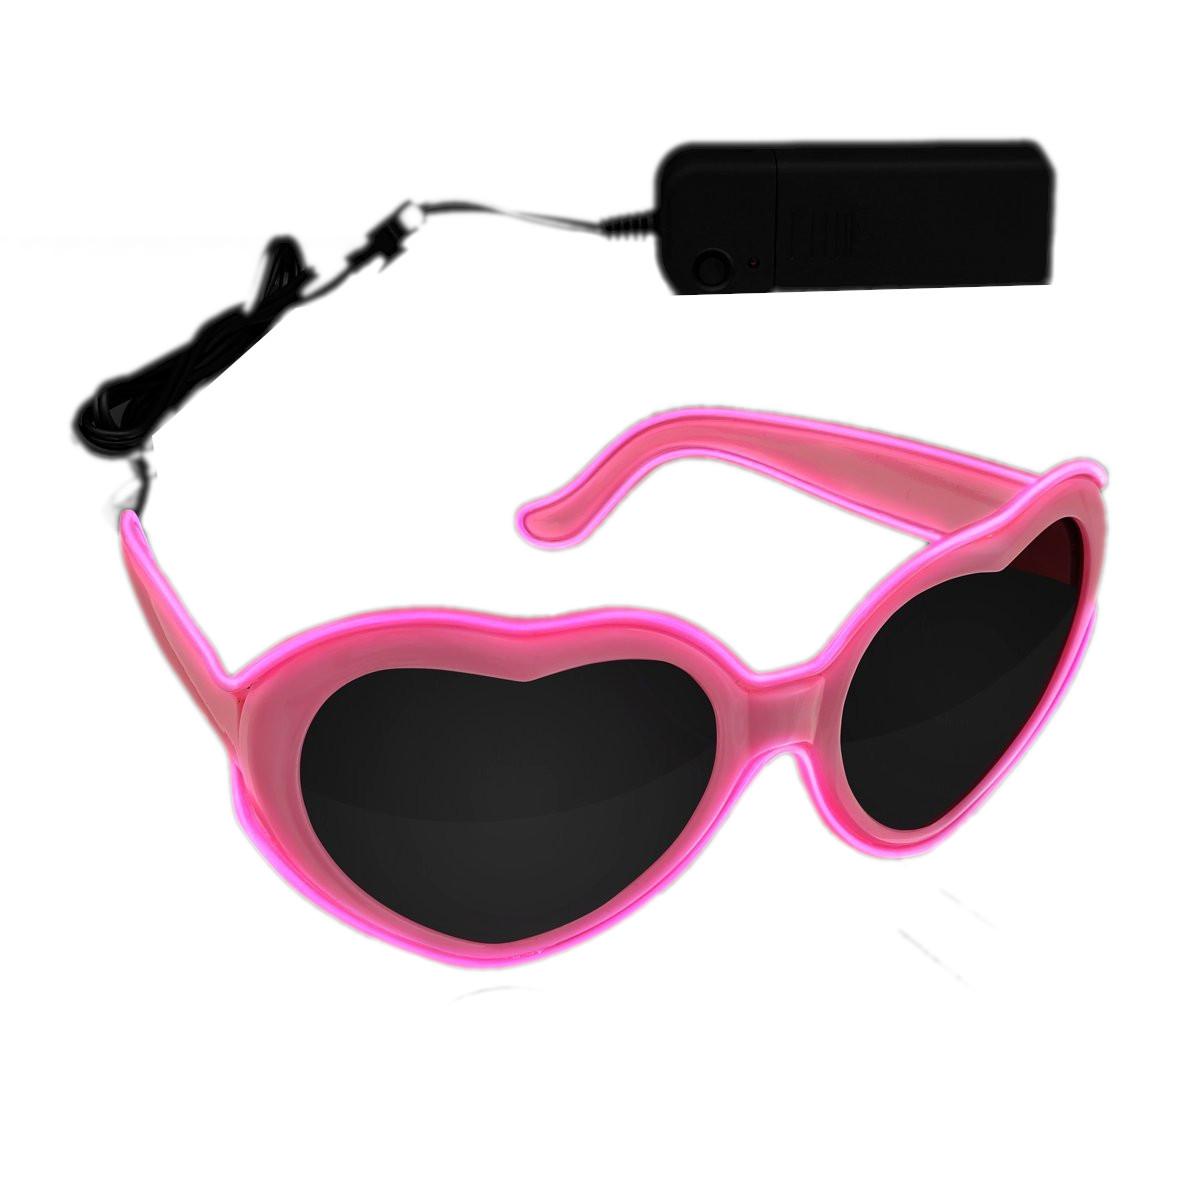 Stylish Heart-Shaped Glowing Pink EL Wire Sunglasses All Products